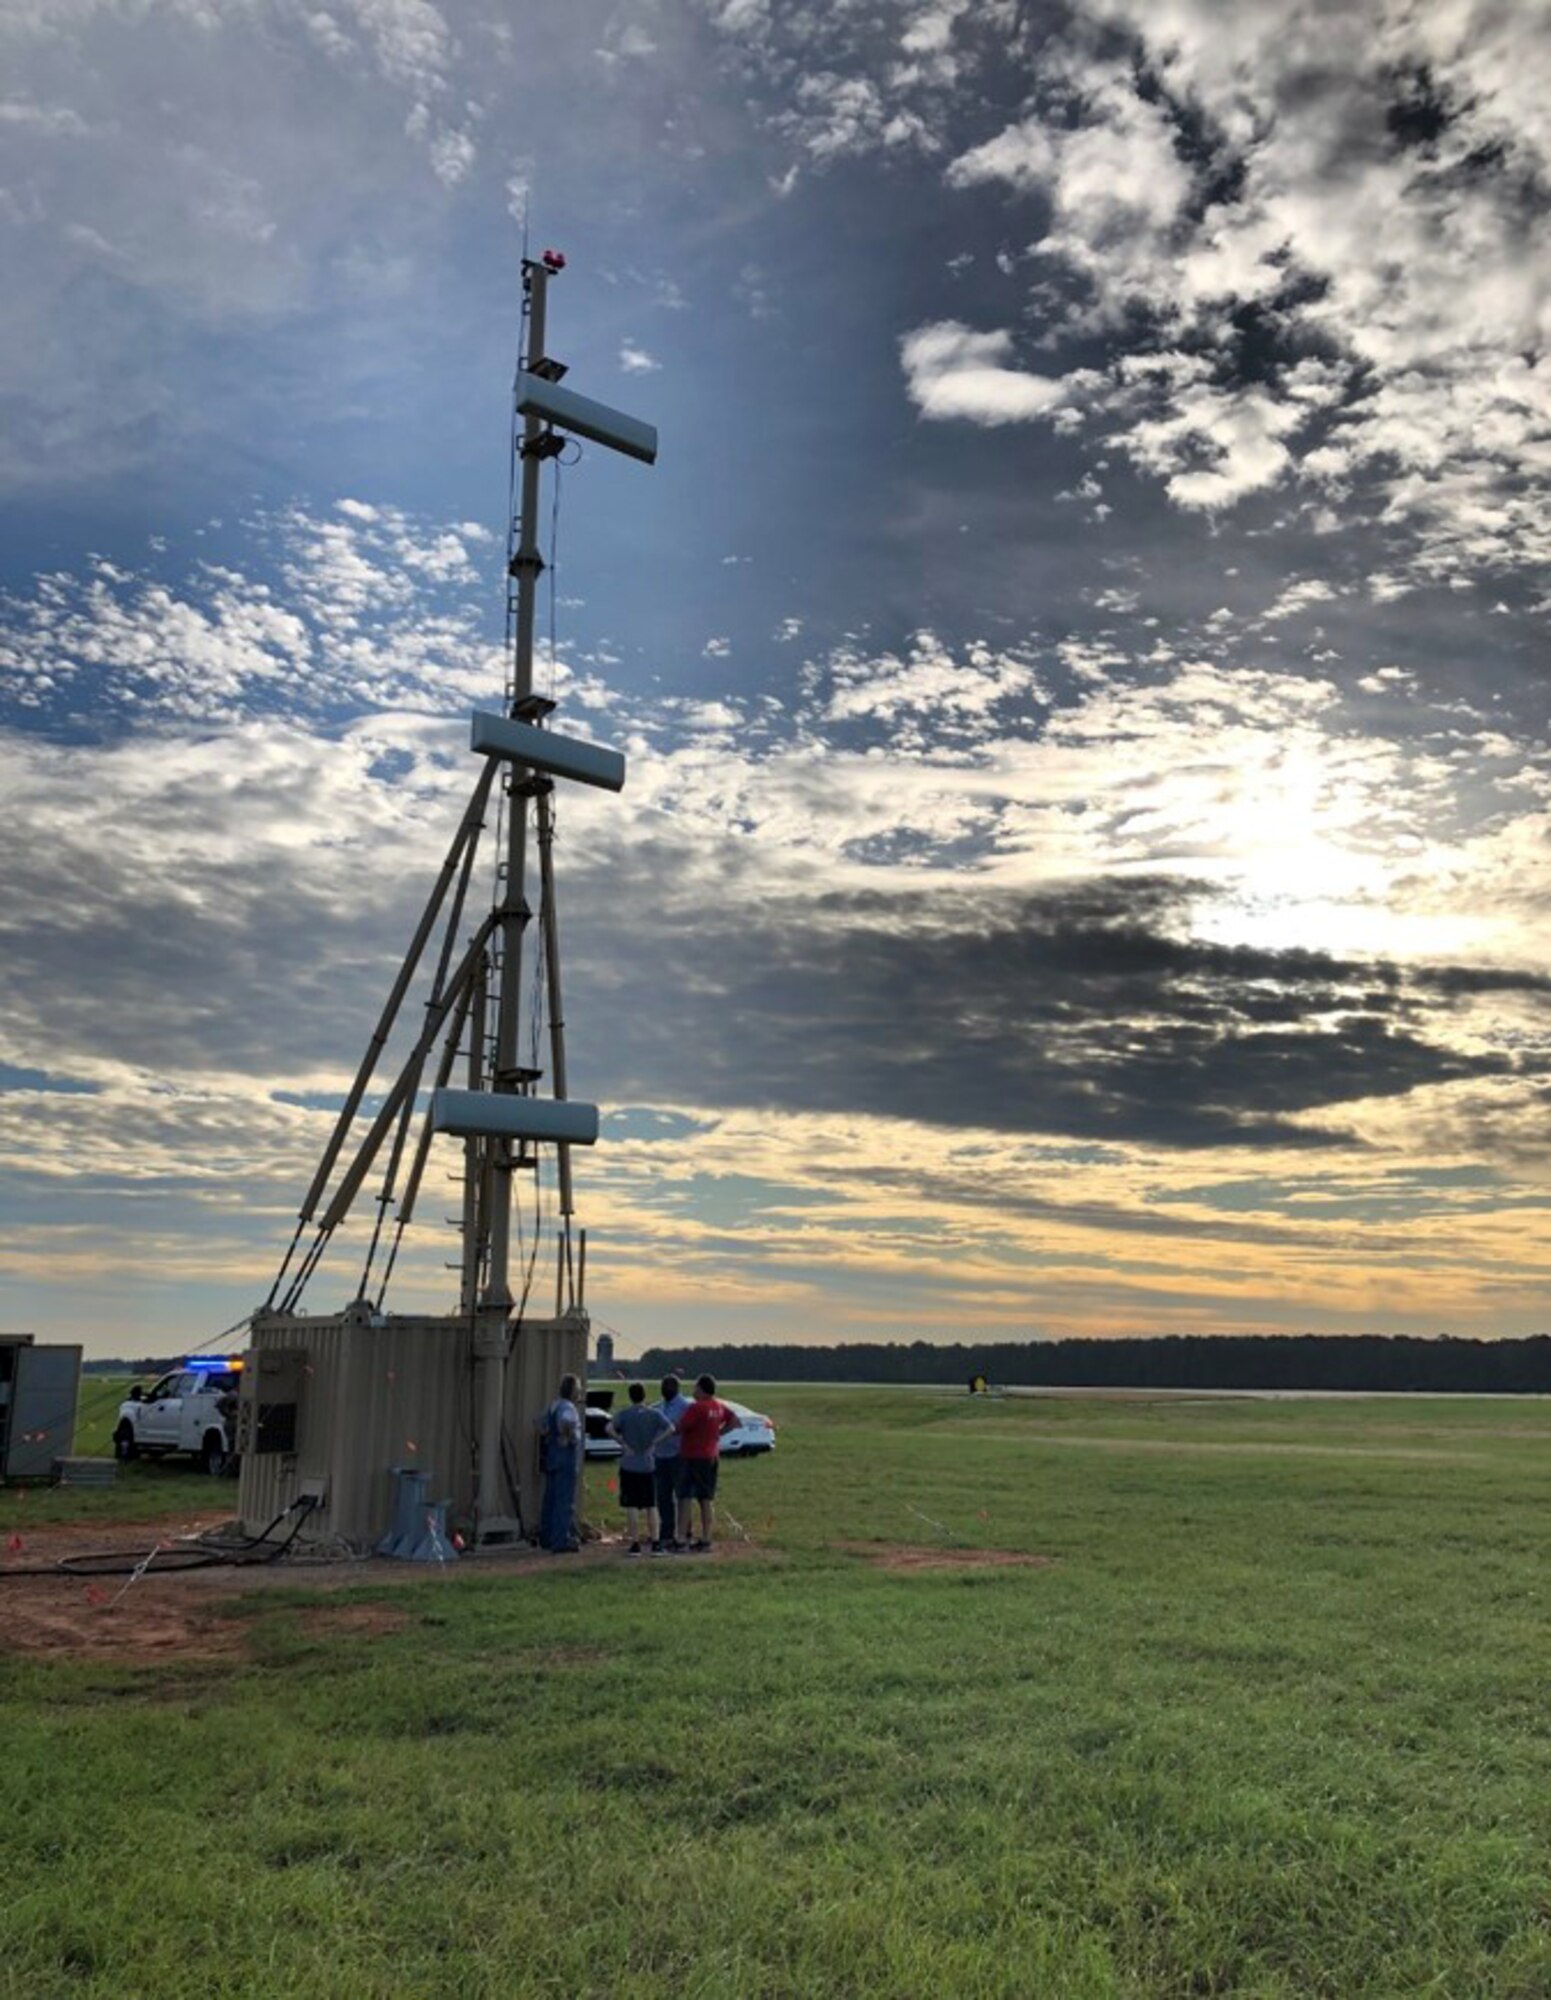 A team finalizes the setup of the Deployable Instrument Landing Systems glideslope mast and shelter at Shaw Air Force Base, S.C., in early 2019. The D-ILS program office, headquartered at Hanscom Air Force Base, Mass., deployed the technology to Shaw in September 2019 to support runway repair operations. (Courtesy photo)